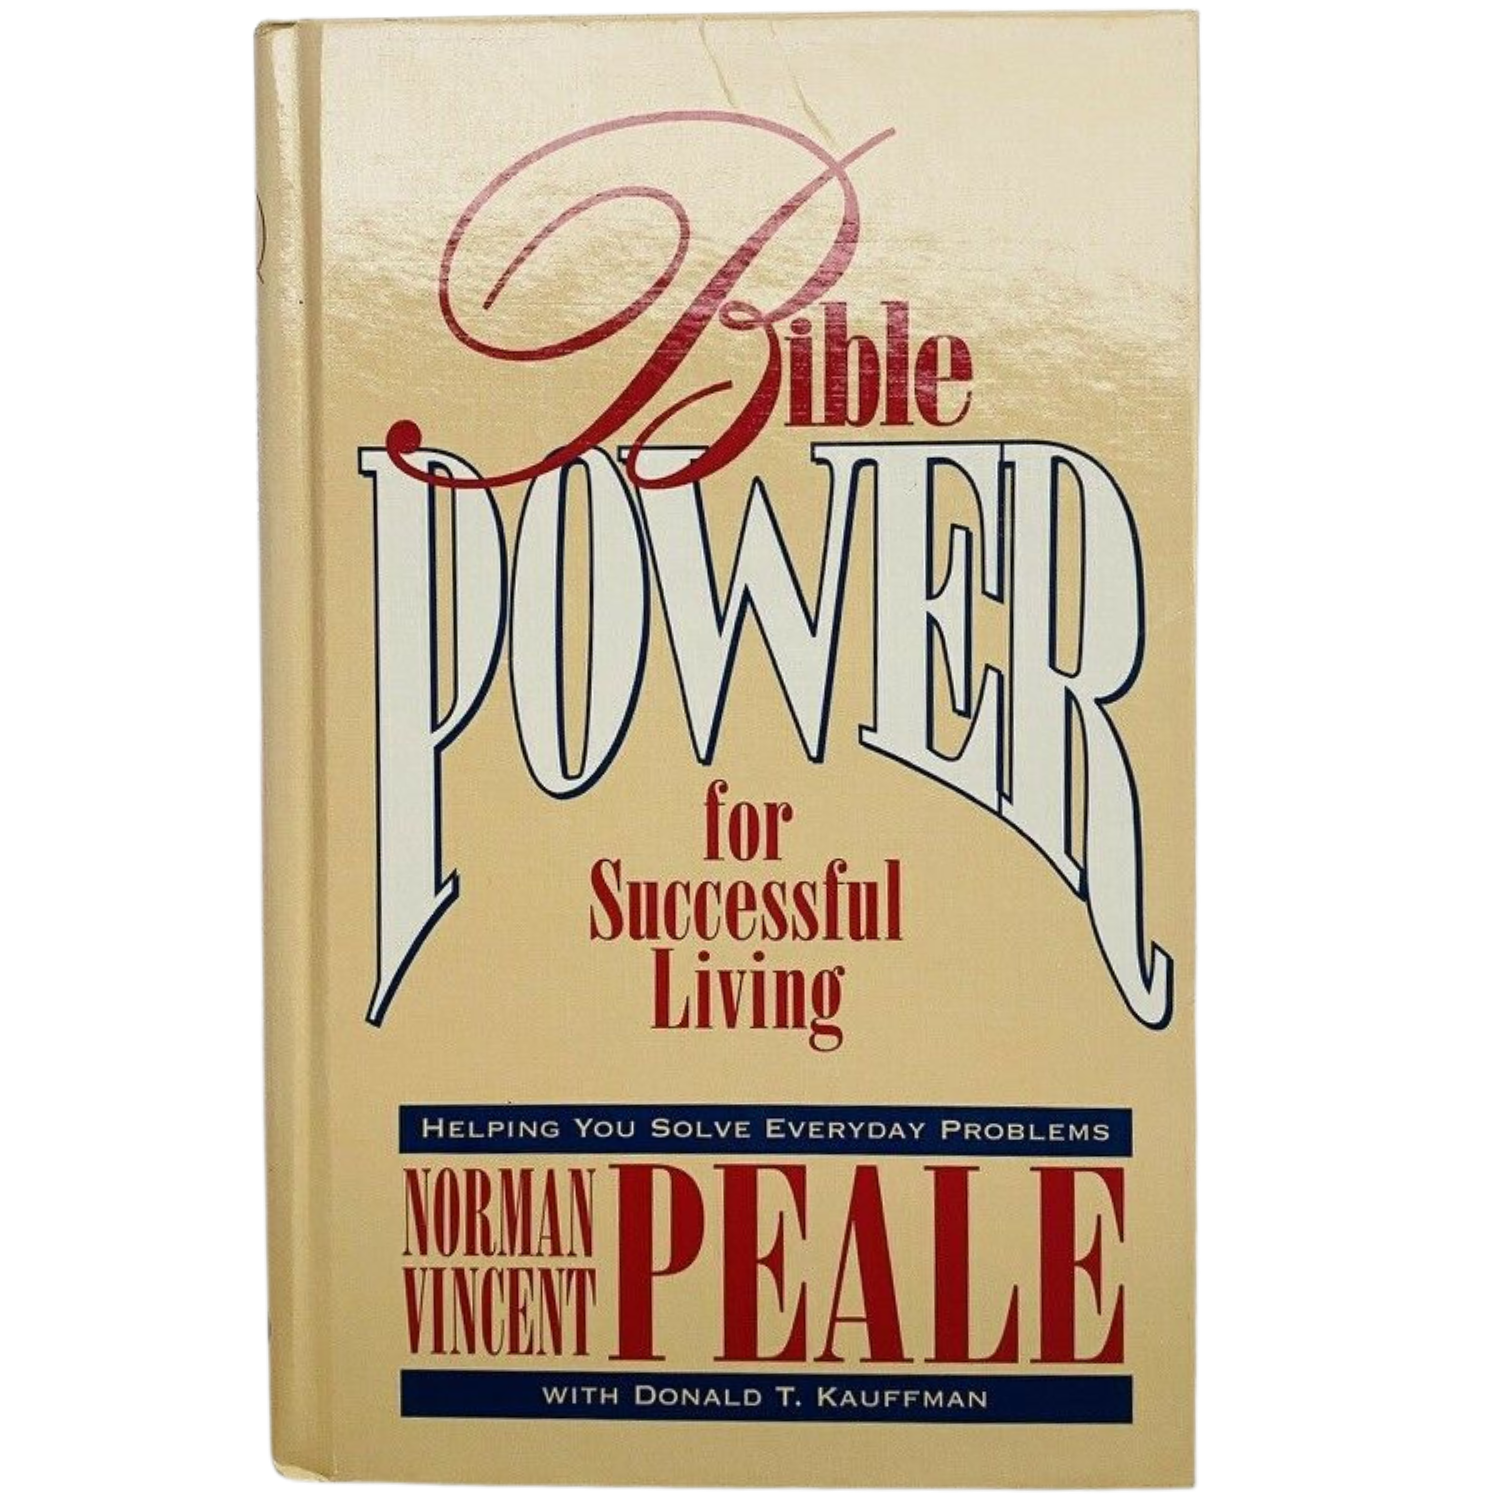 Bible Power for Successful Living Helping You Solve Everyday Problems